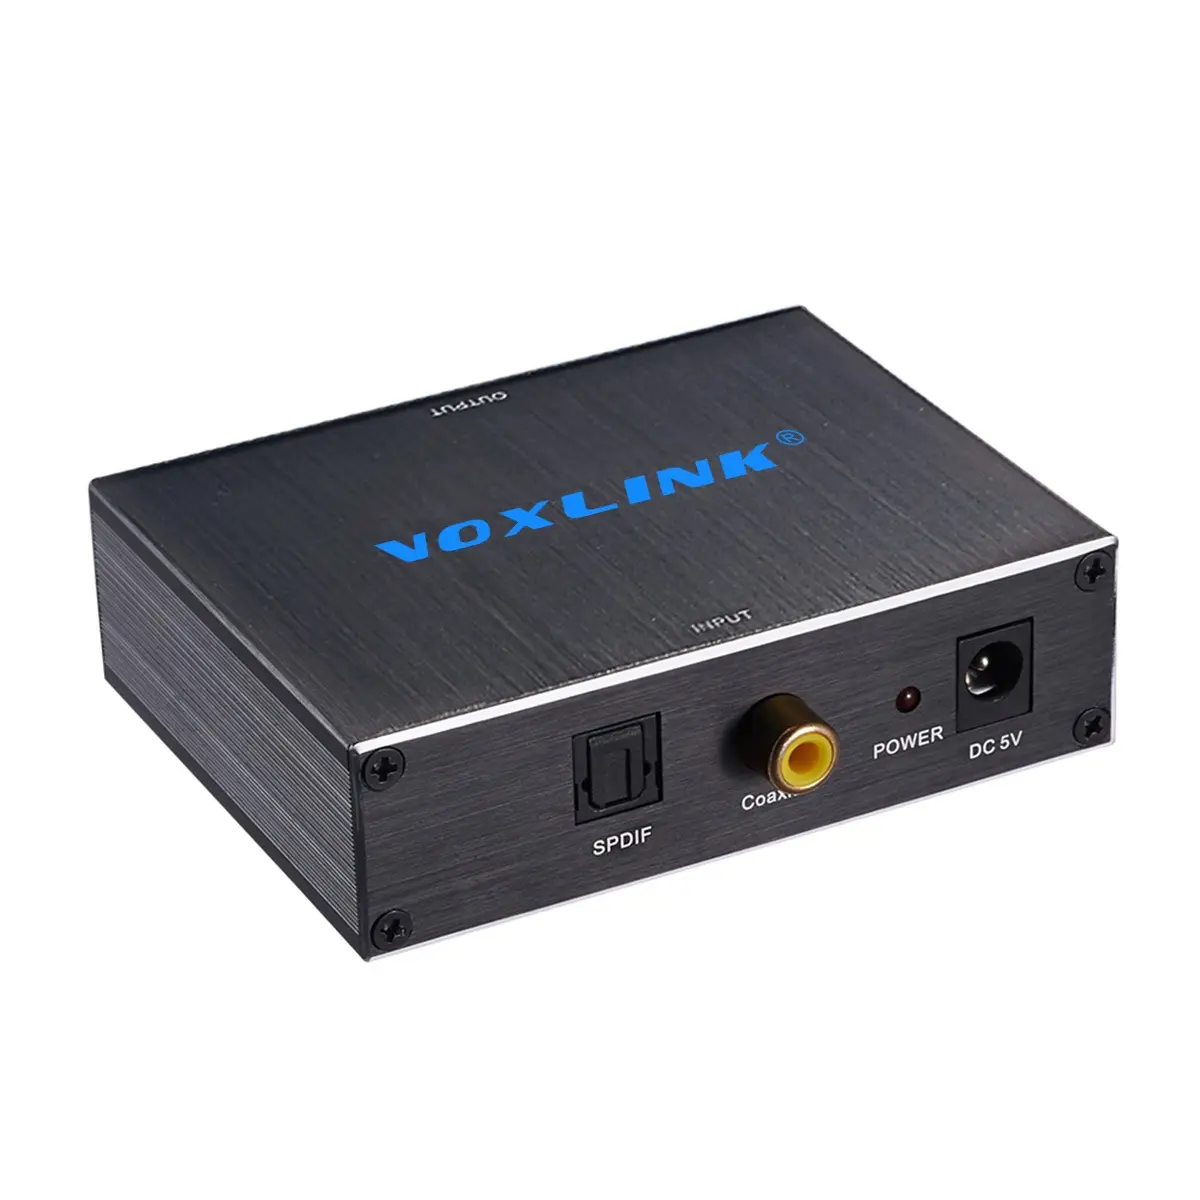 Home audio, video & accessories optical fiber coaxial or SPDIF Toslink digital audio to analog stereo audio L/R converter